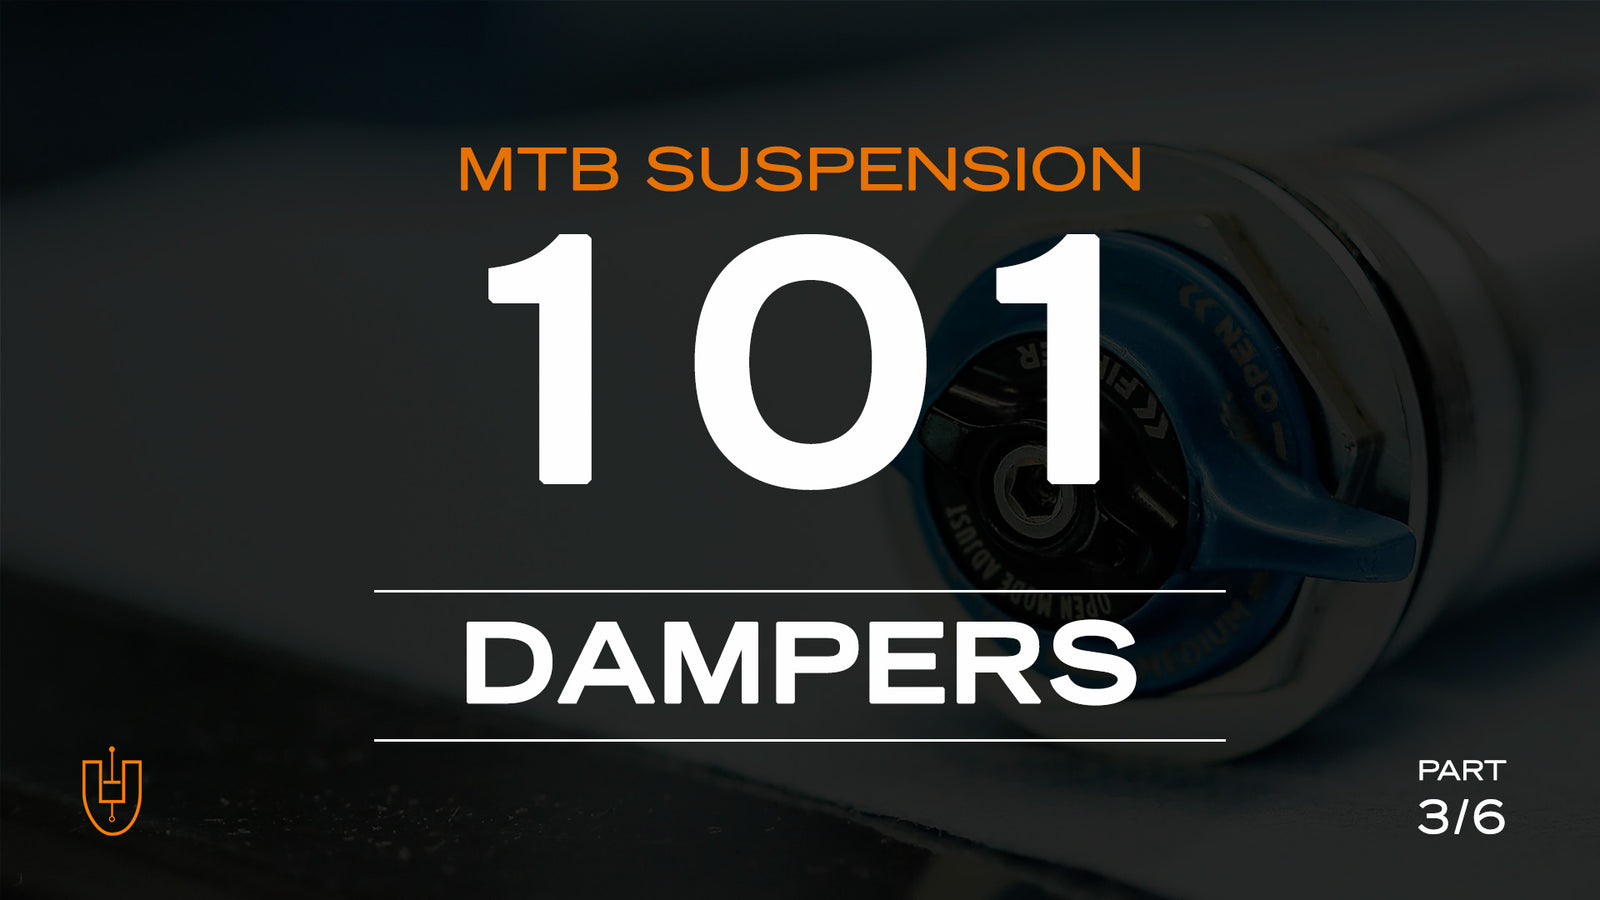 MOUNTAIN BIKE SUSPENSION 101: Dampers (Part 3 of 6)